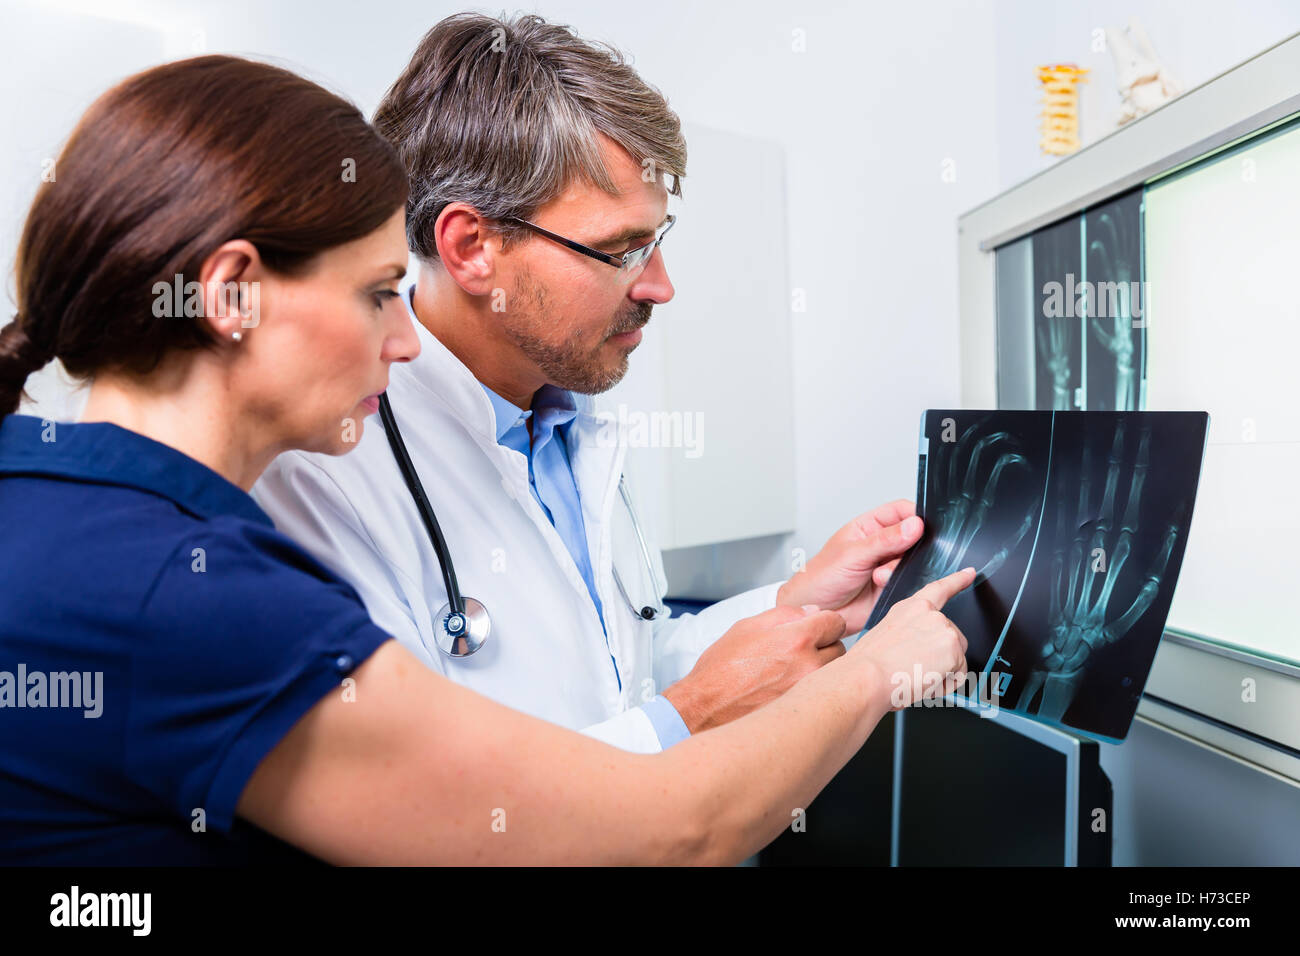 doctor with x-ray image of the patient's hand Stock Photo